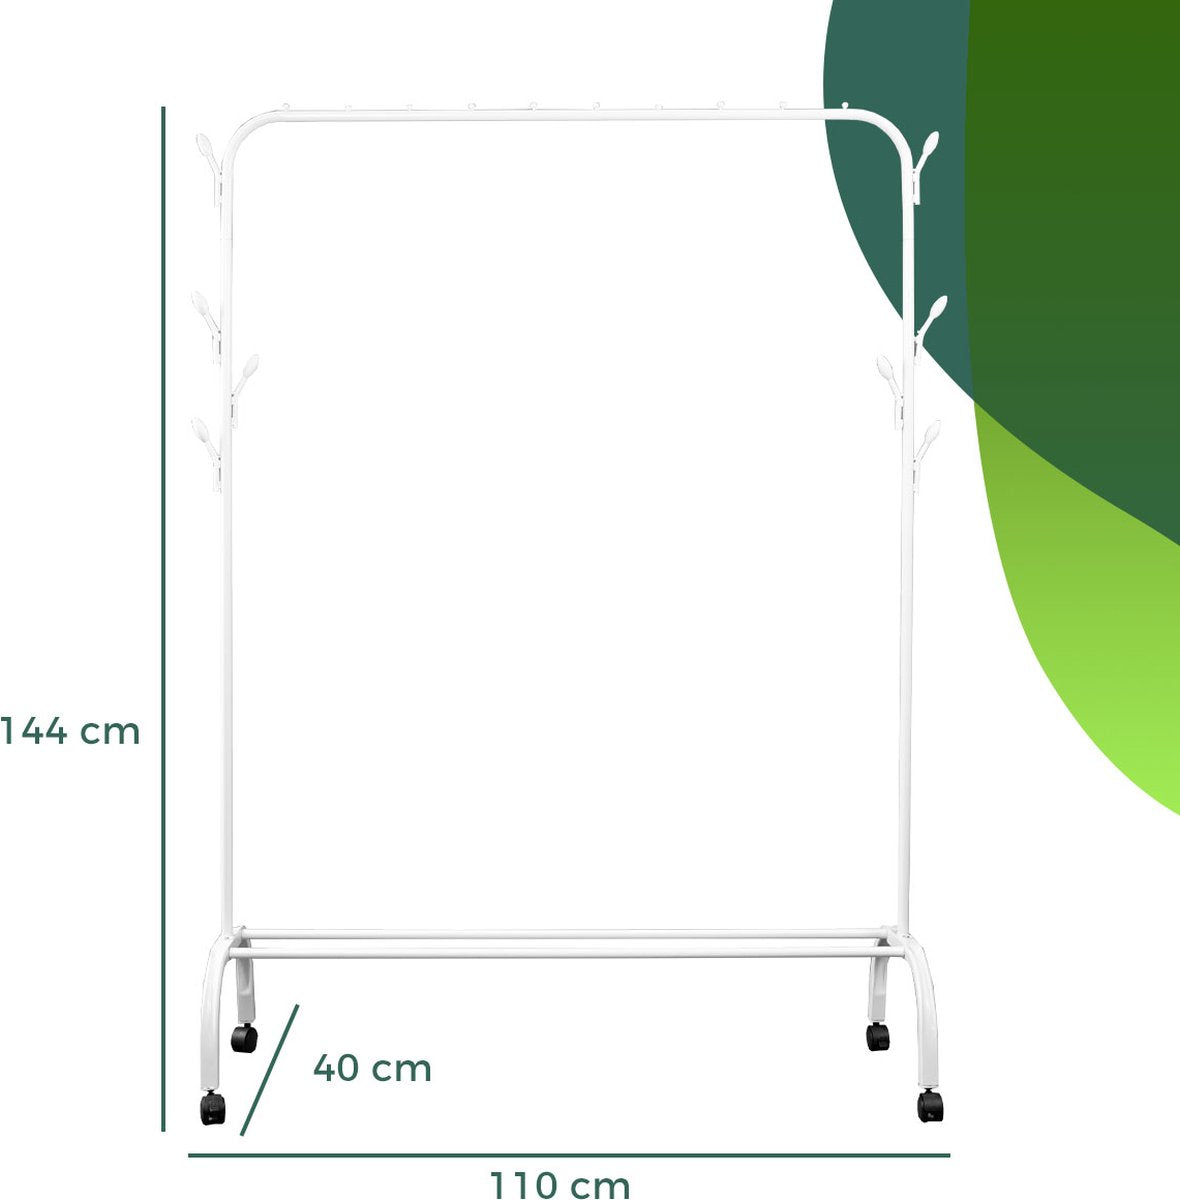 LG Life's Green Clothes Rack White